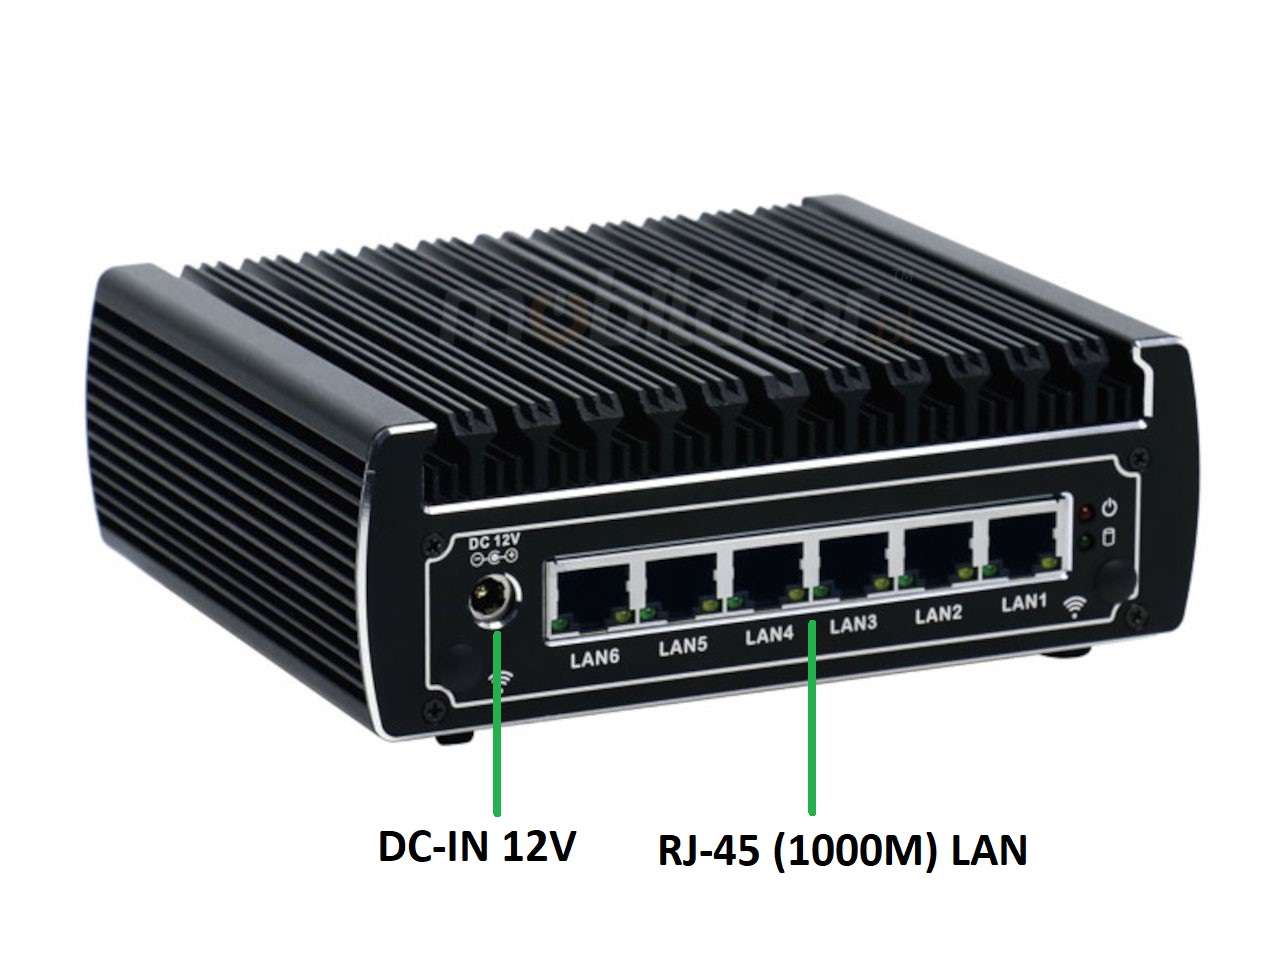  IBOX N133 v.8, back IO, industrial small fast reliable fanless industrial small LAN INTEL i3 HDD DDR4